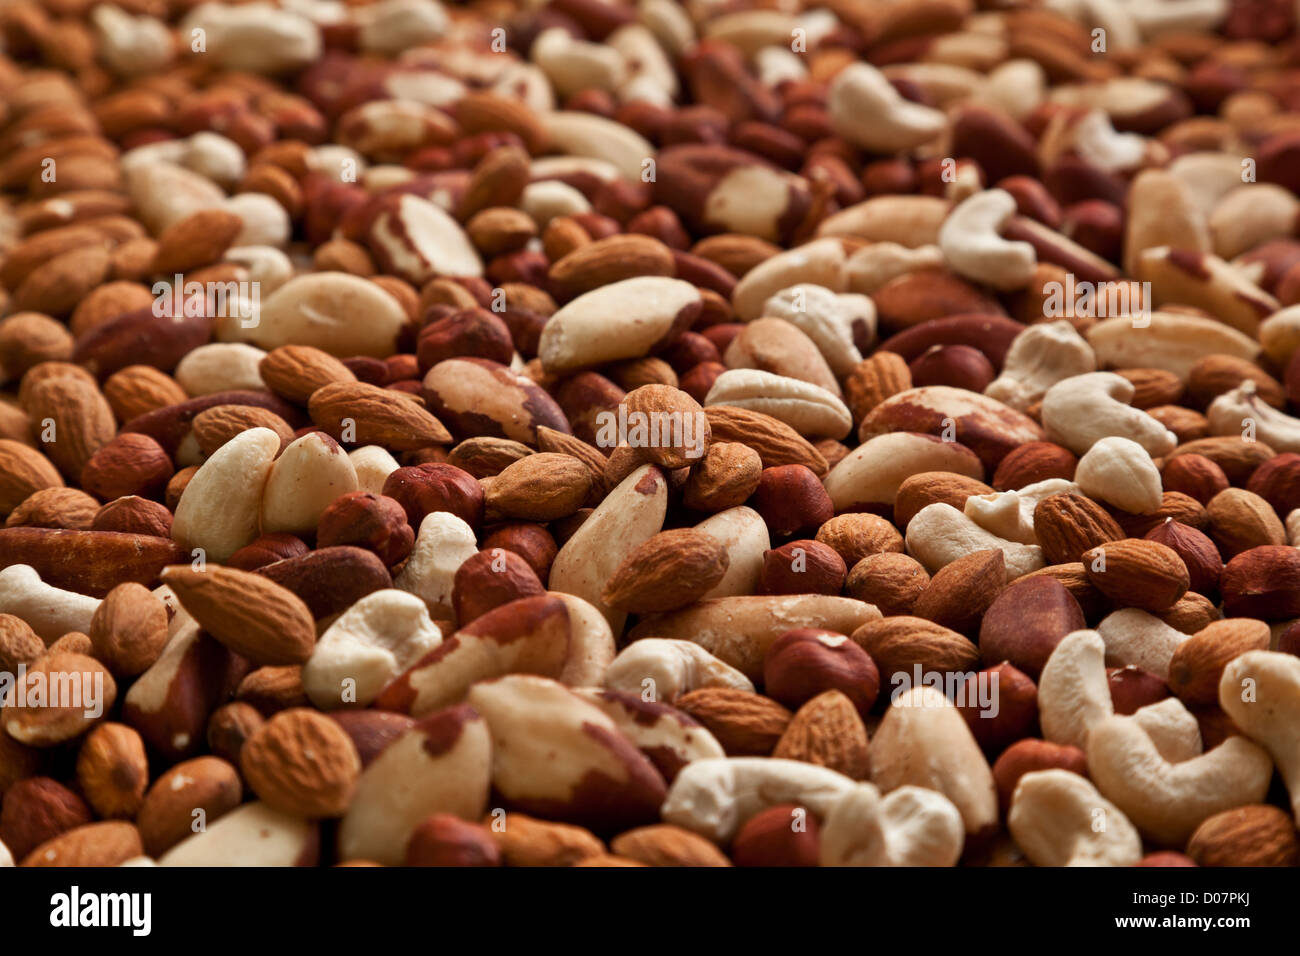 A lot of different types of nuts Stock Photo